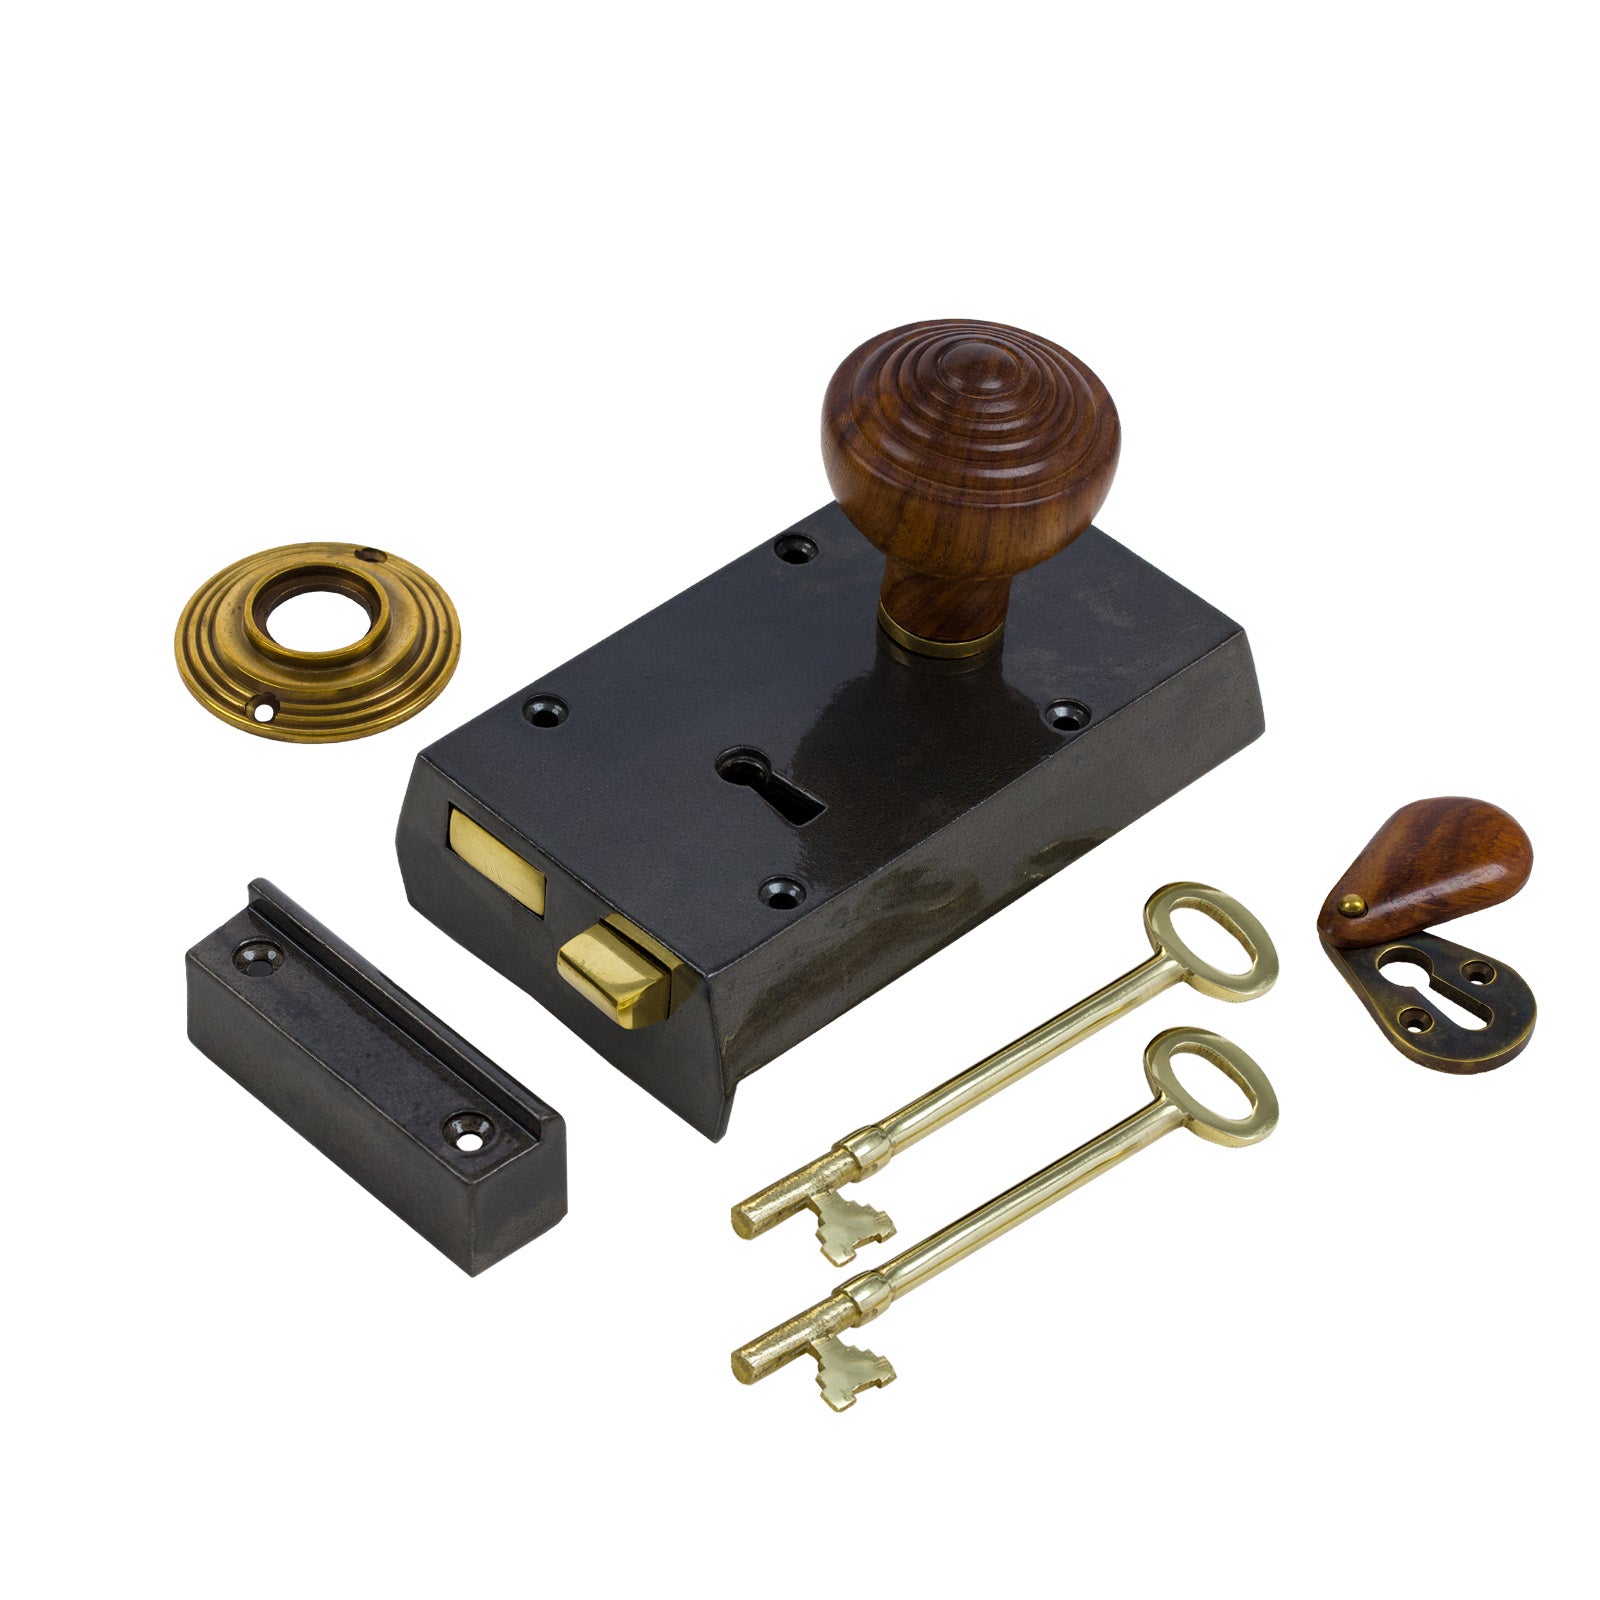 SHOW Right Handed Small Cast Iron Rim Lock With Ringed Door Knob Set - Rosewood